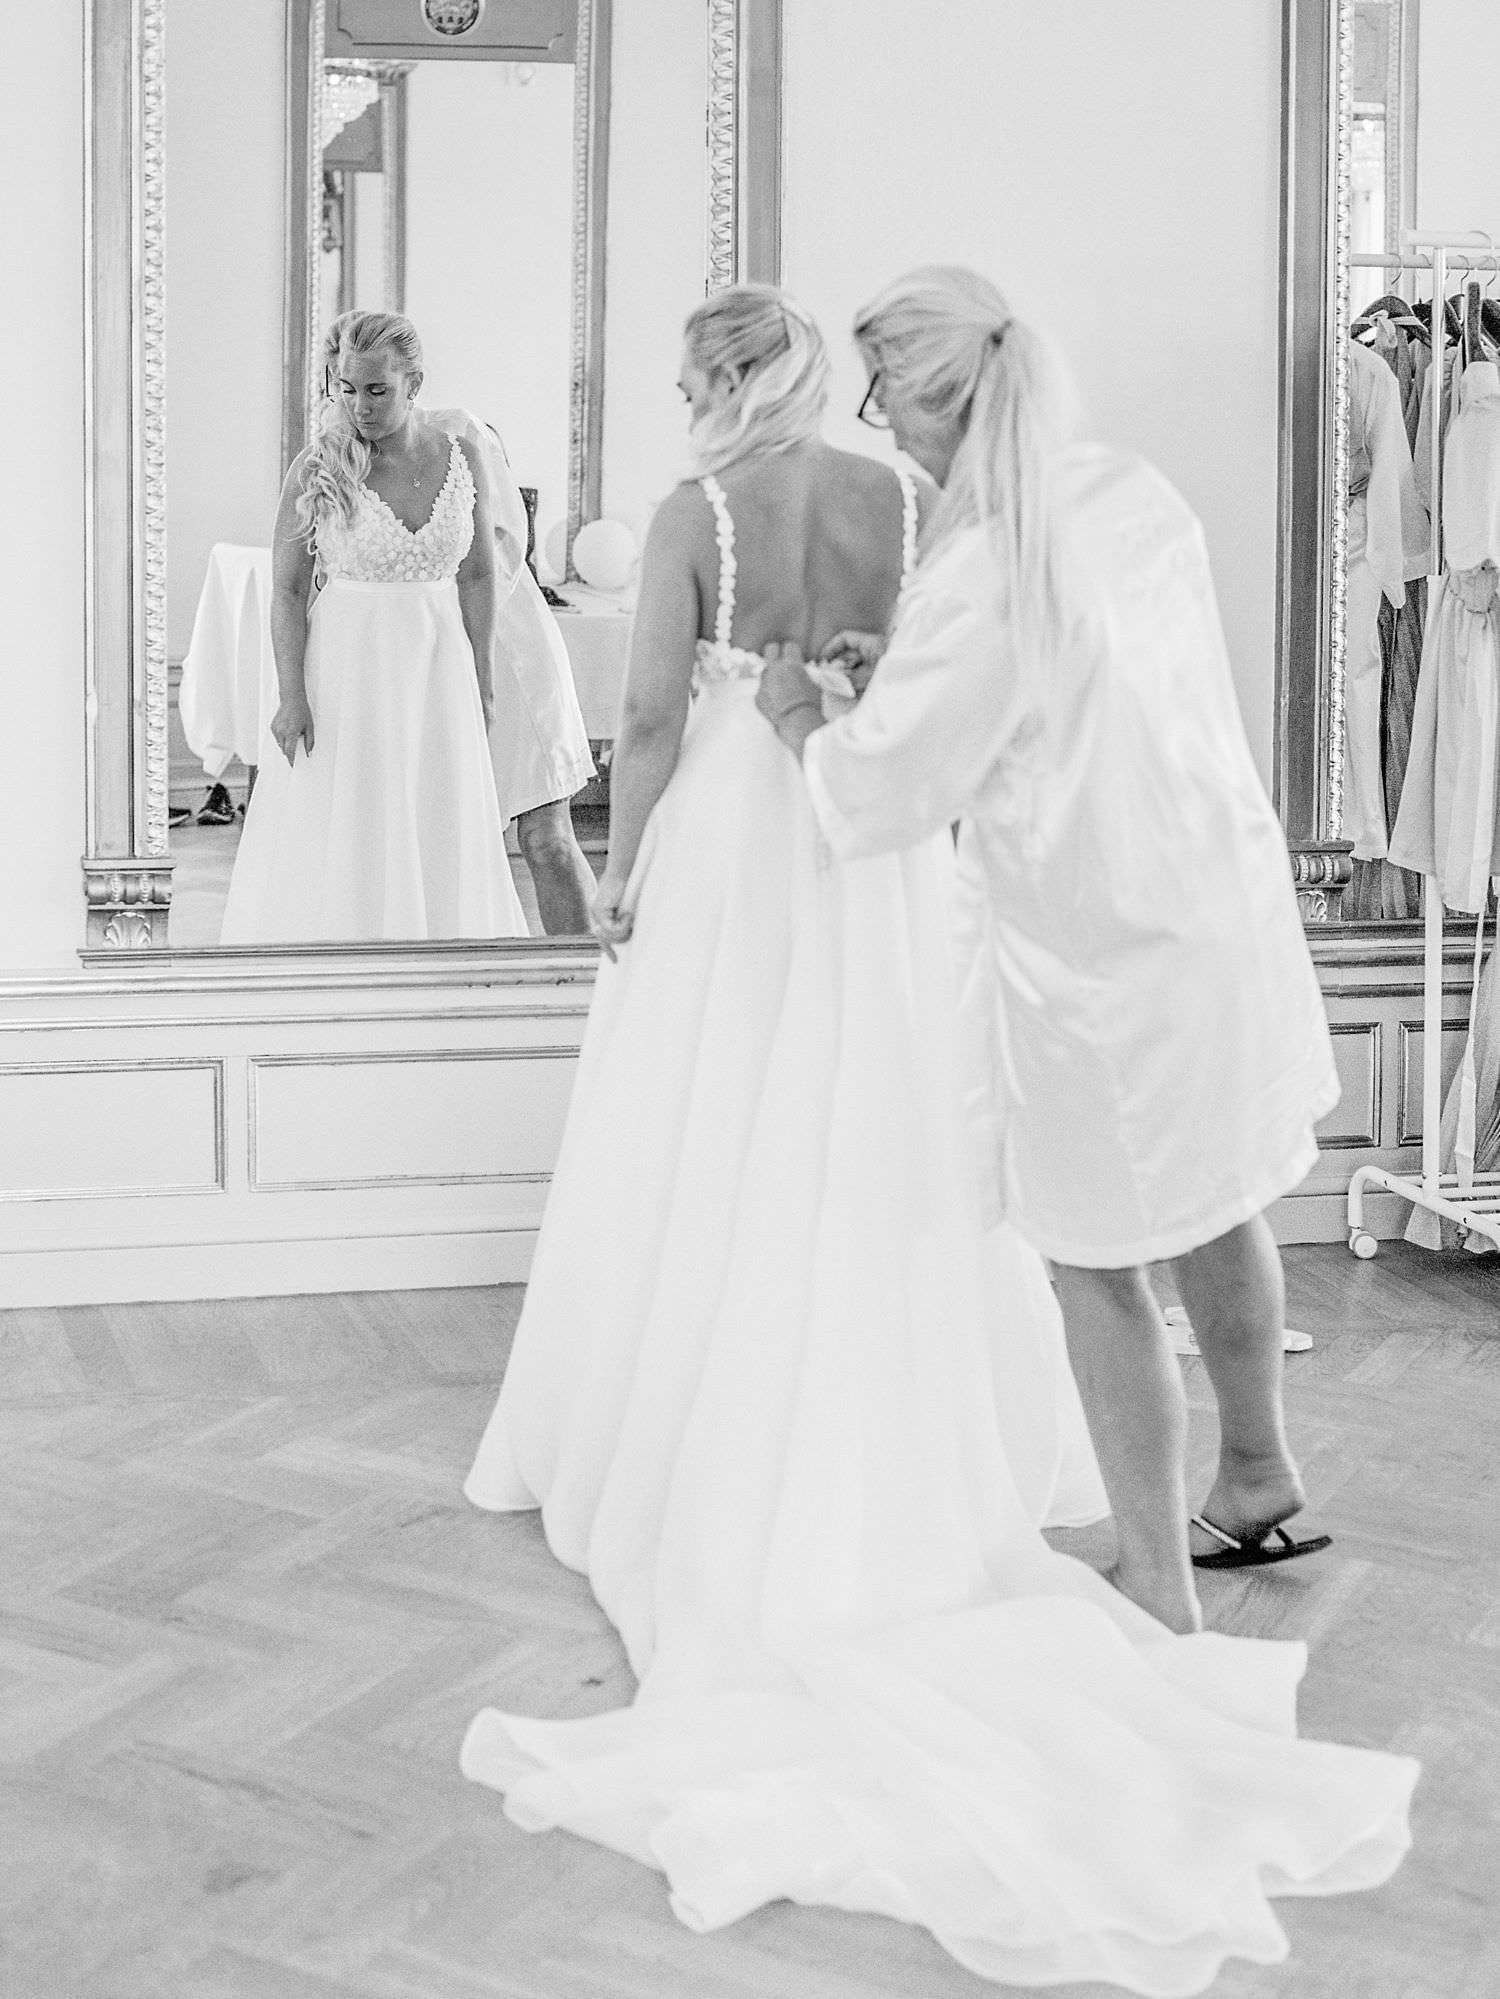 Black and white photograph of the bride getting ready. Her mother is helping her button the dress